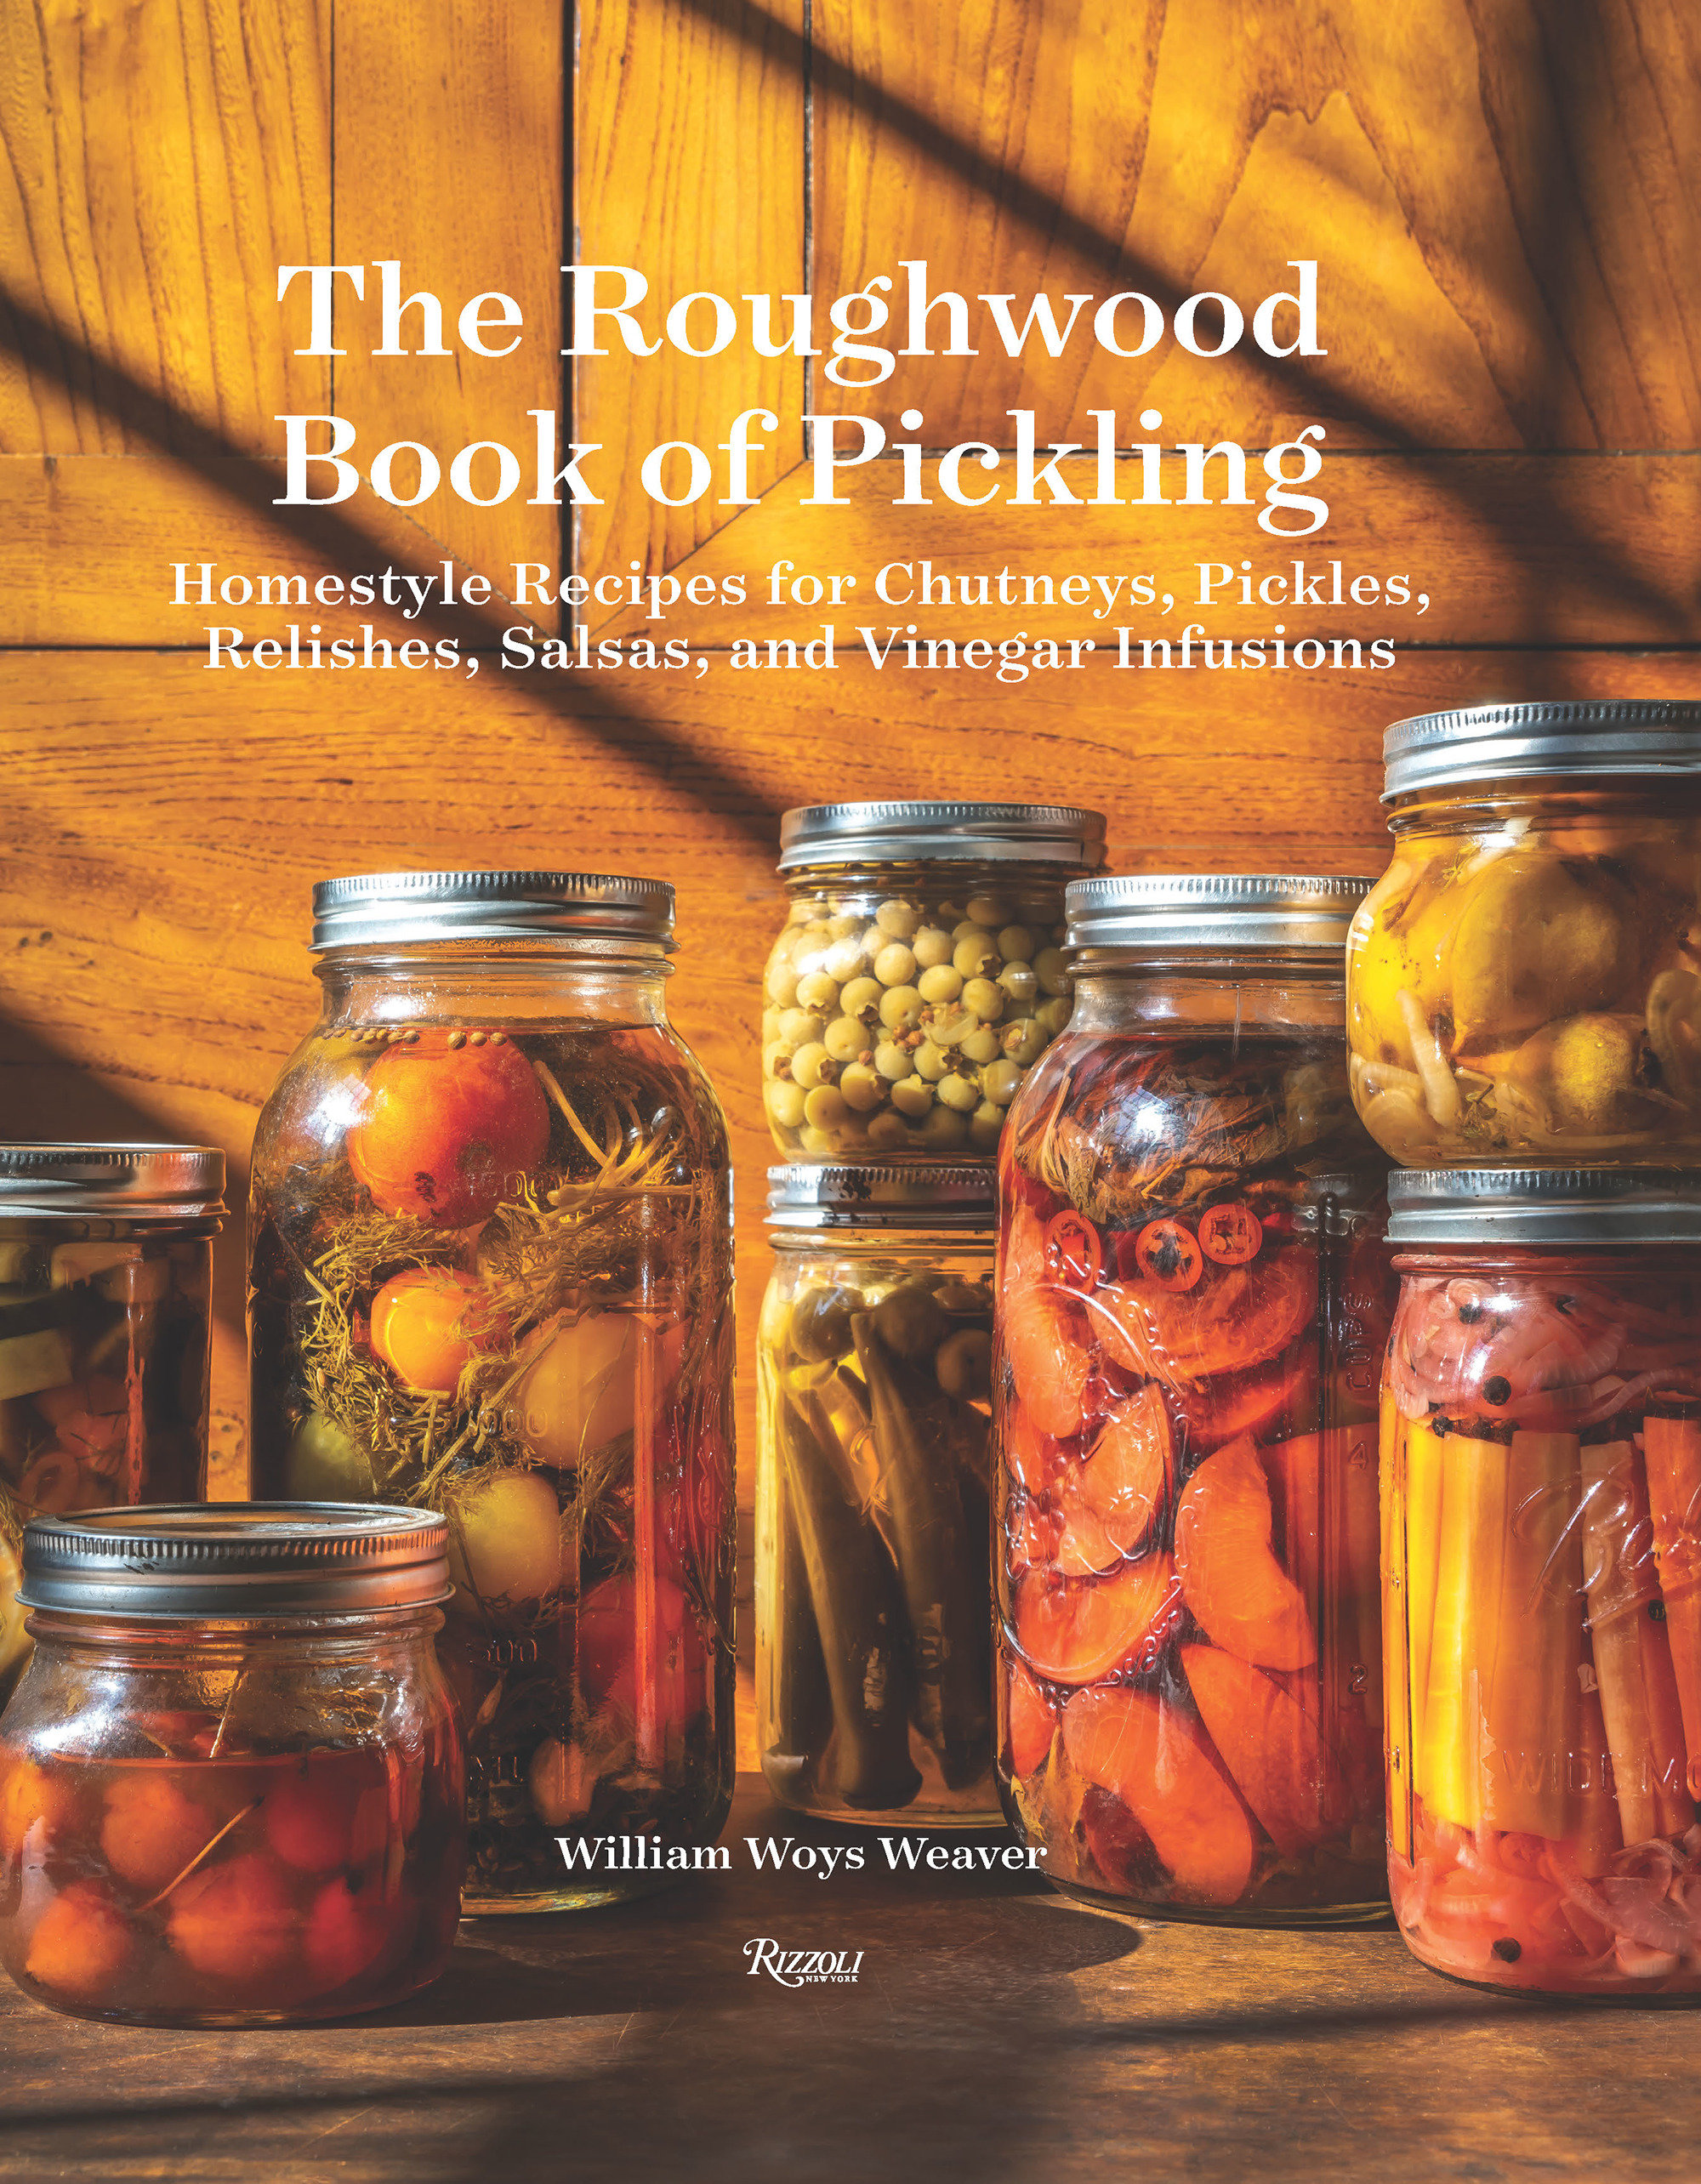 The Roughwood Book Of Pickling (Hardcover Book)